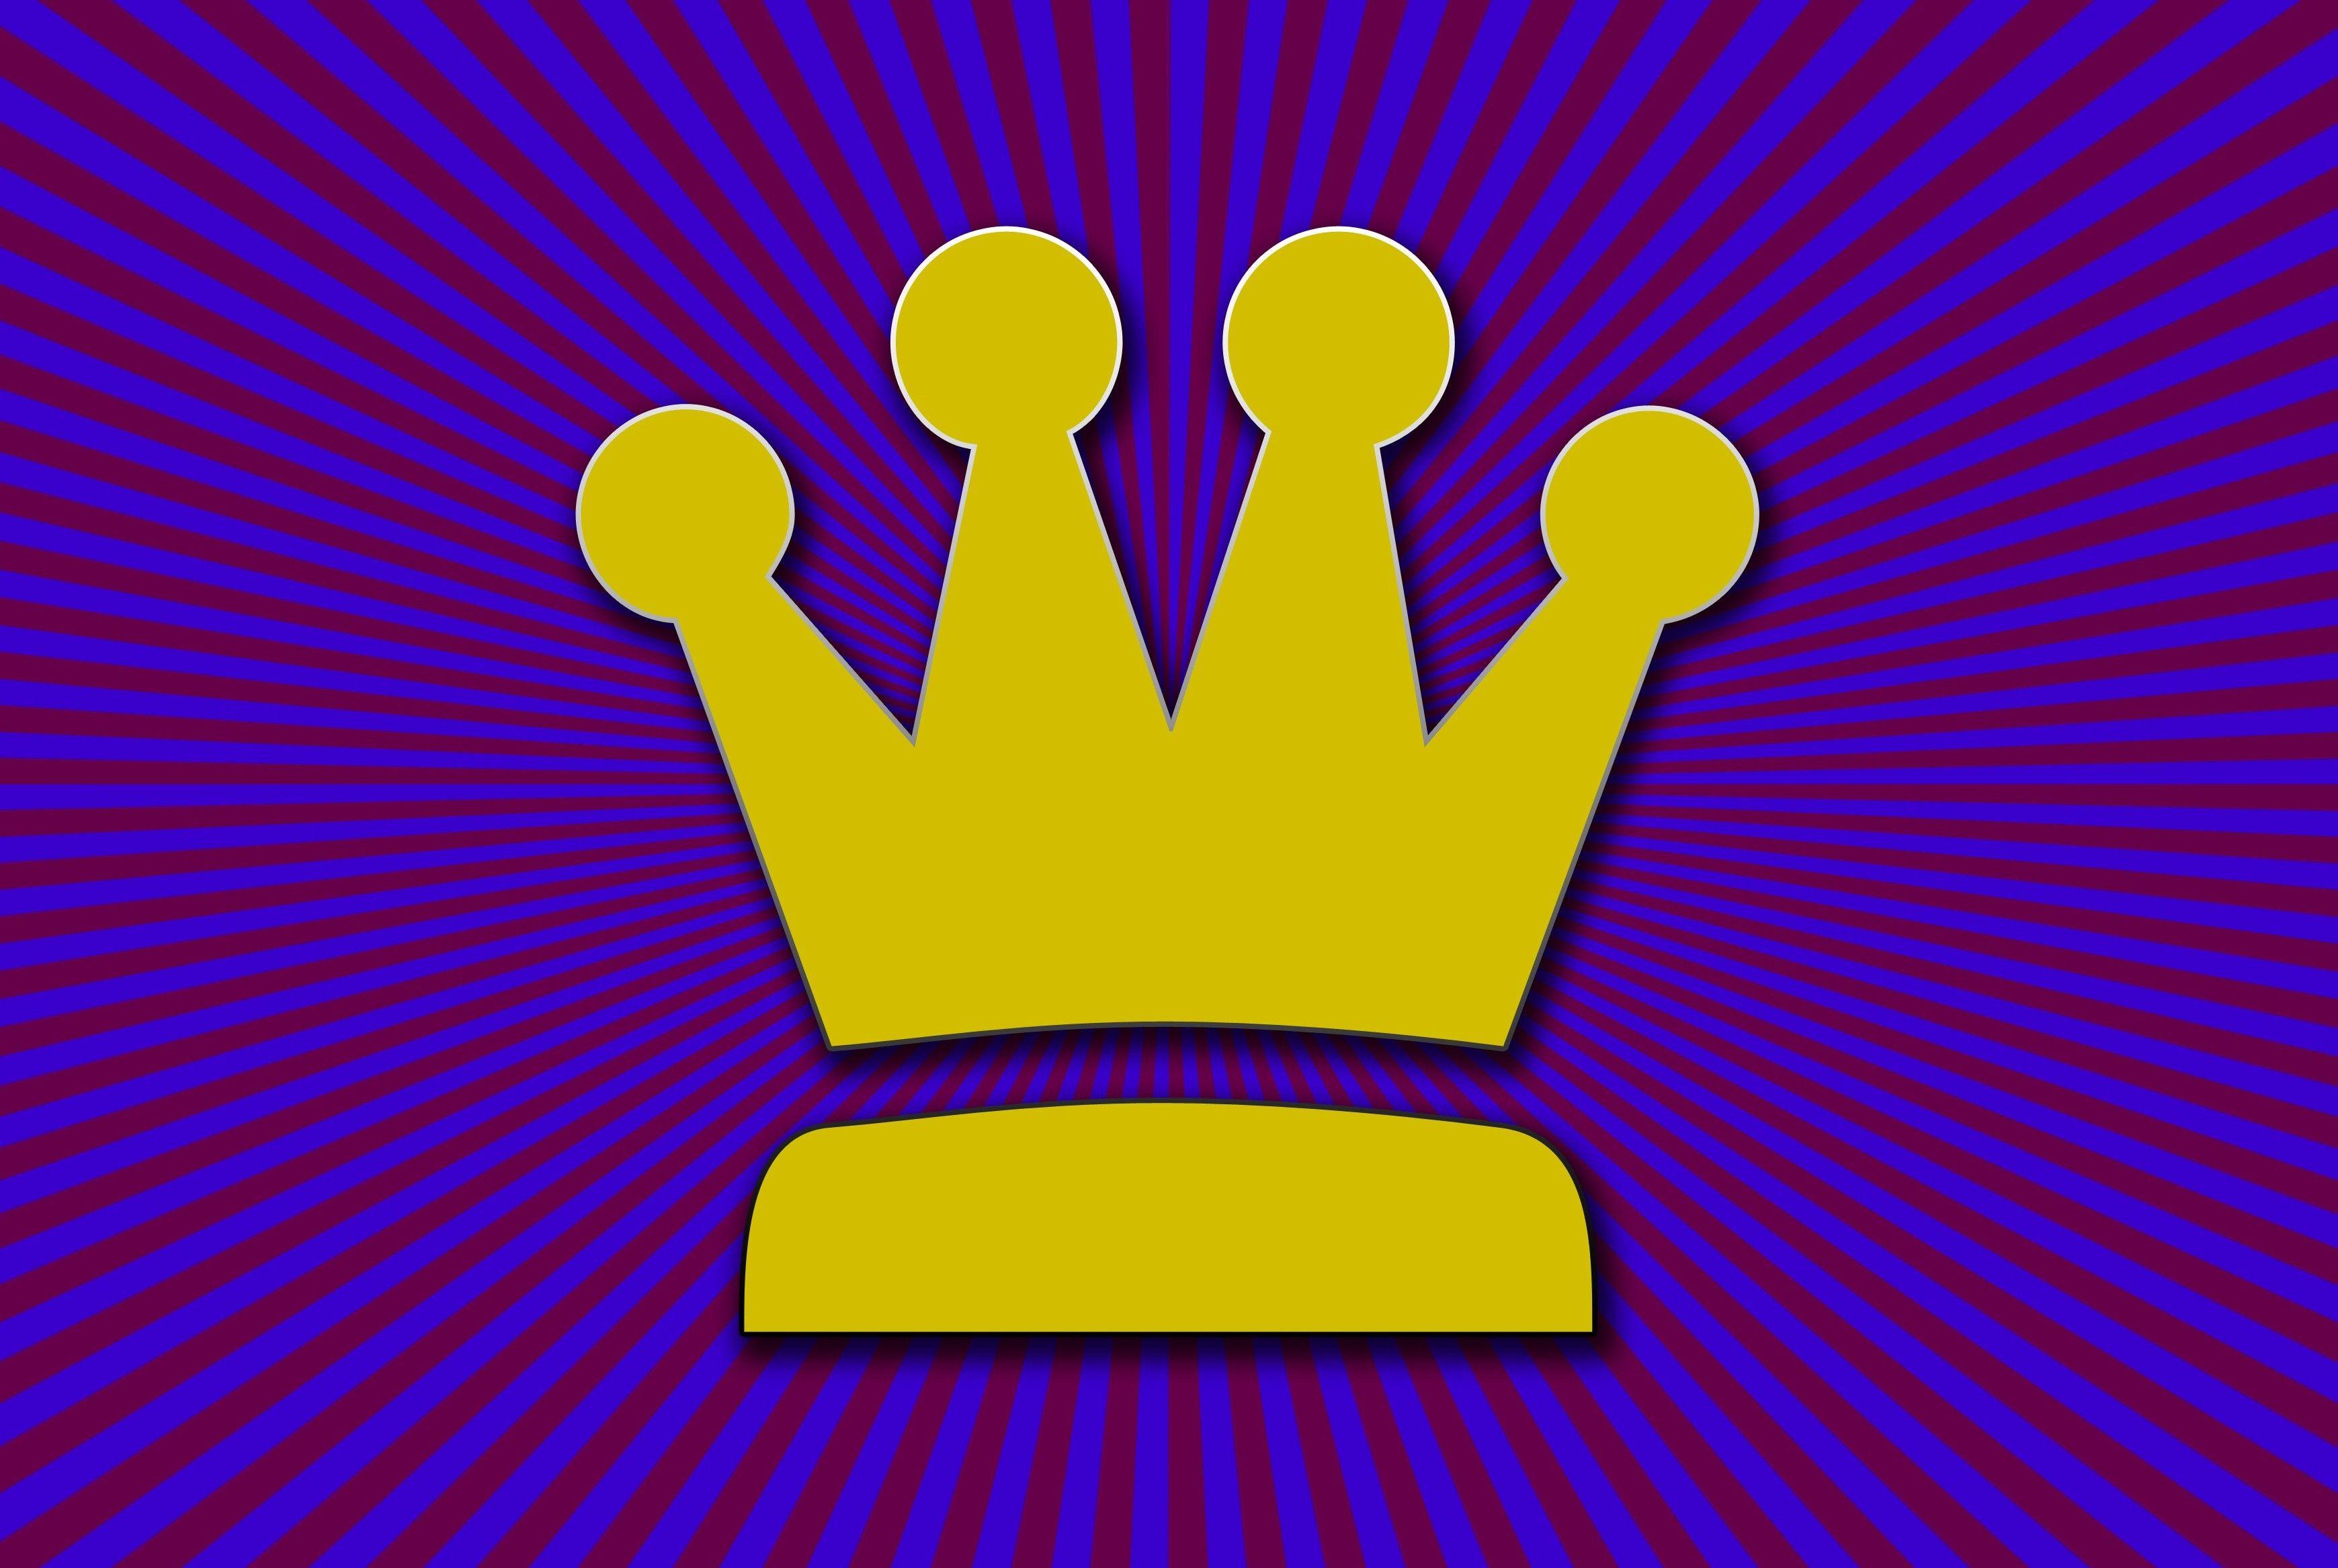 Blue Yellow Crown Logo - shiny crown | Free backgrounds and textures | Cr103.com